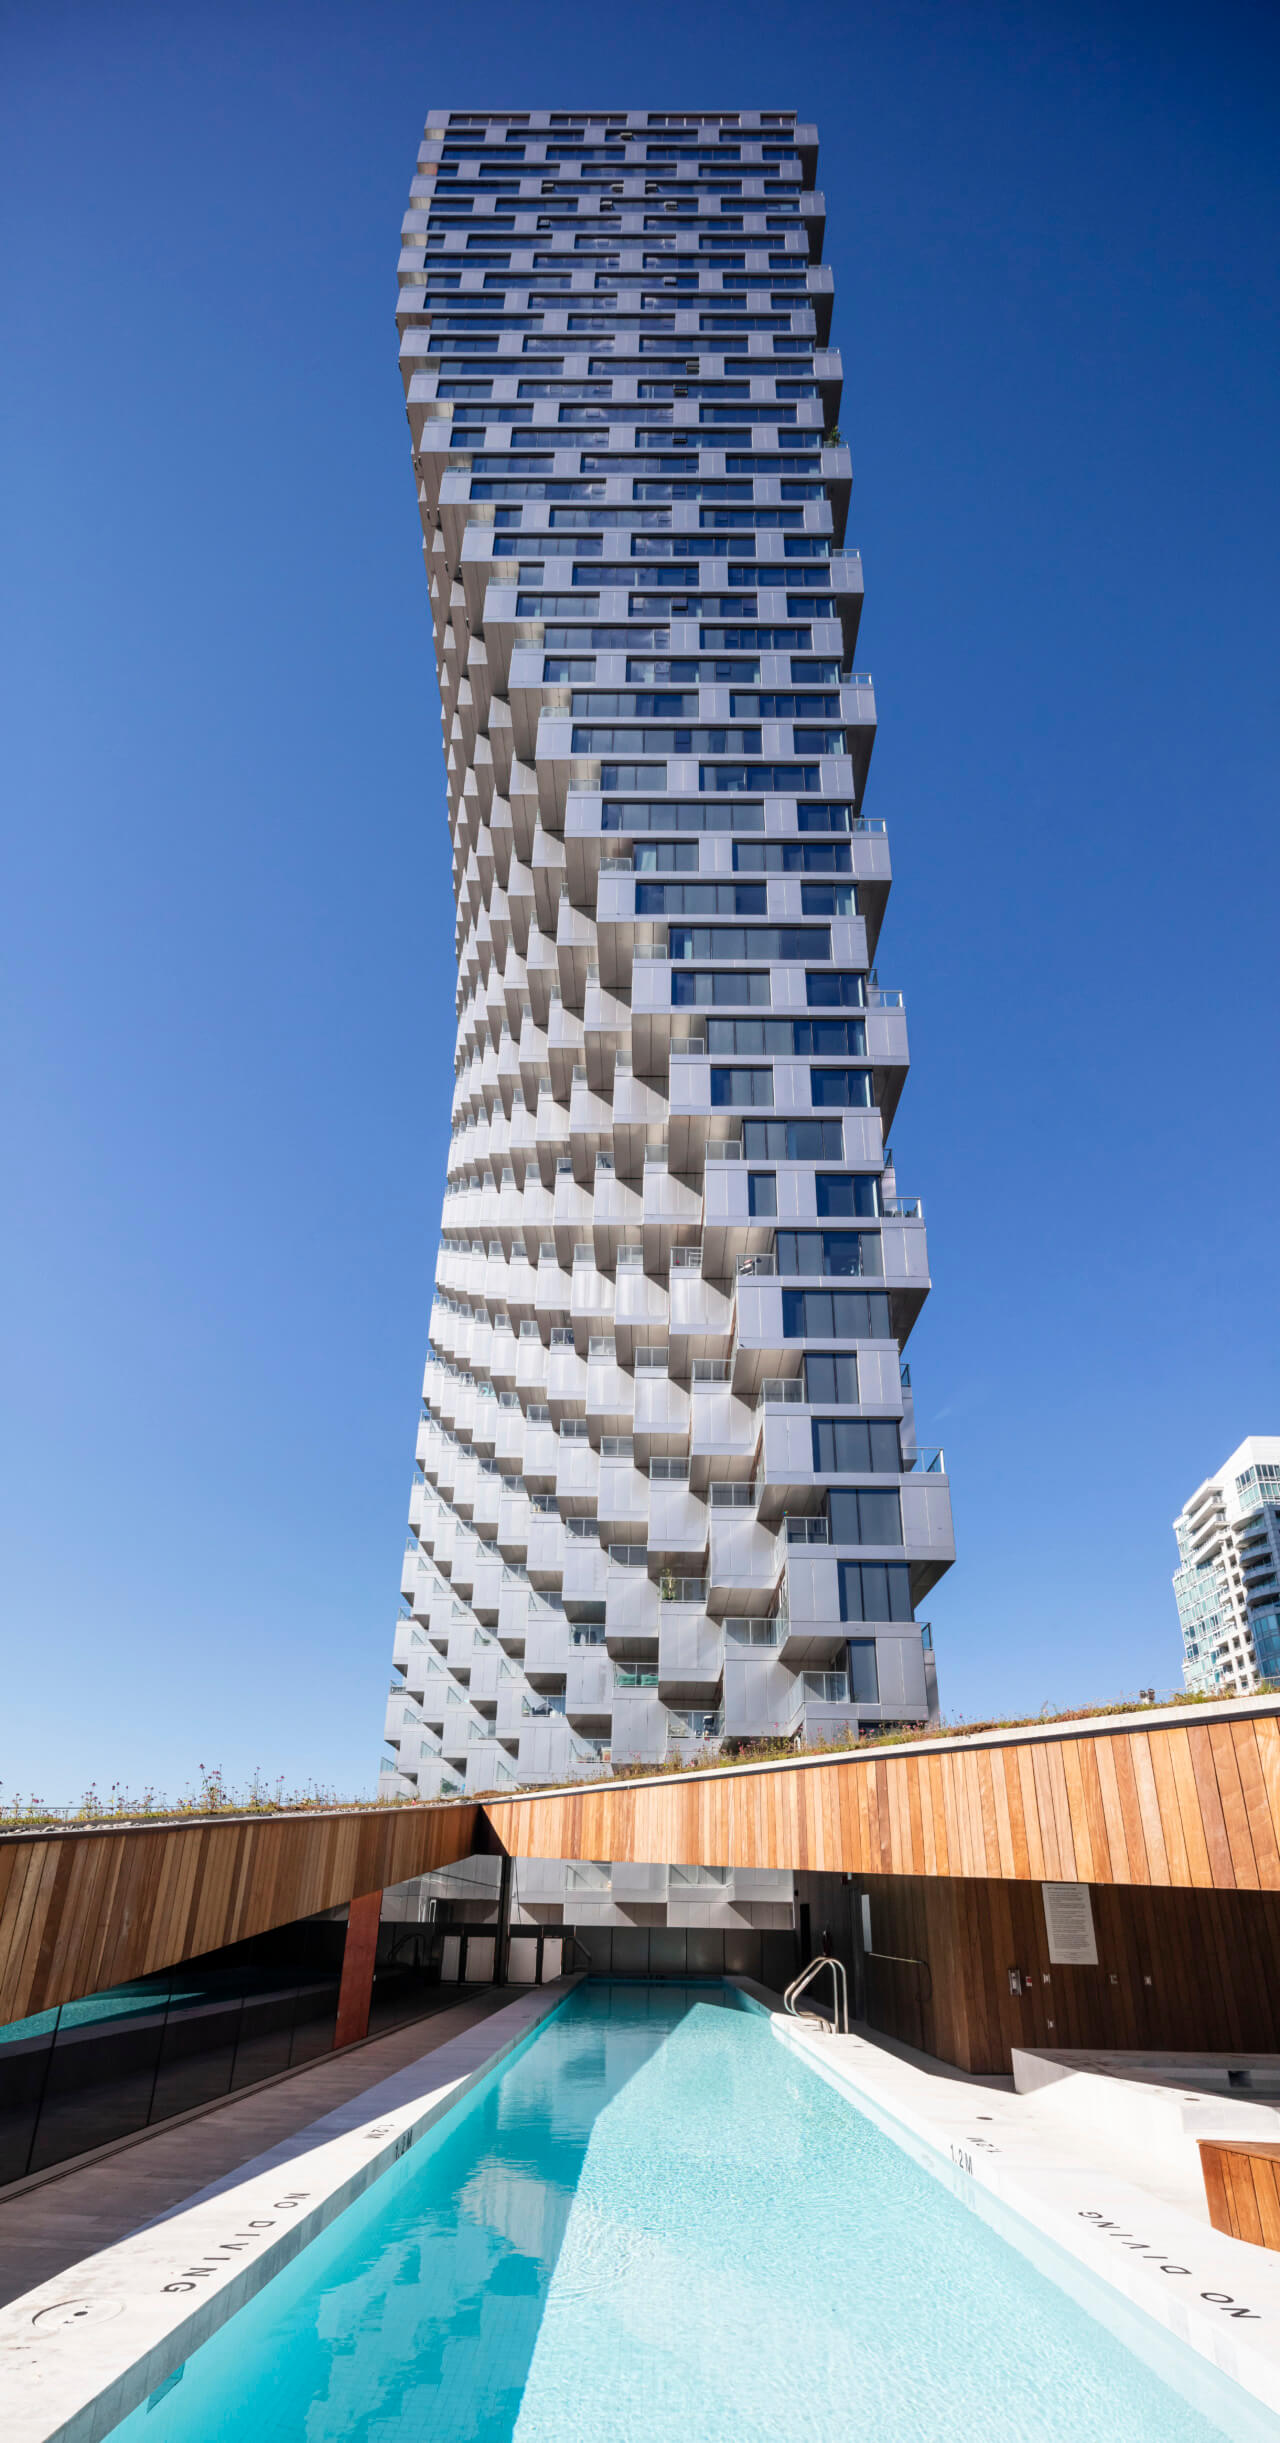 A twisting steel tower, Vancouver House